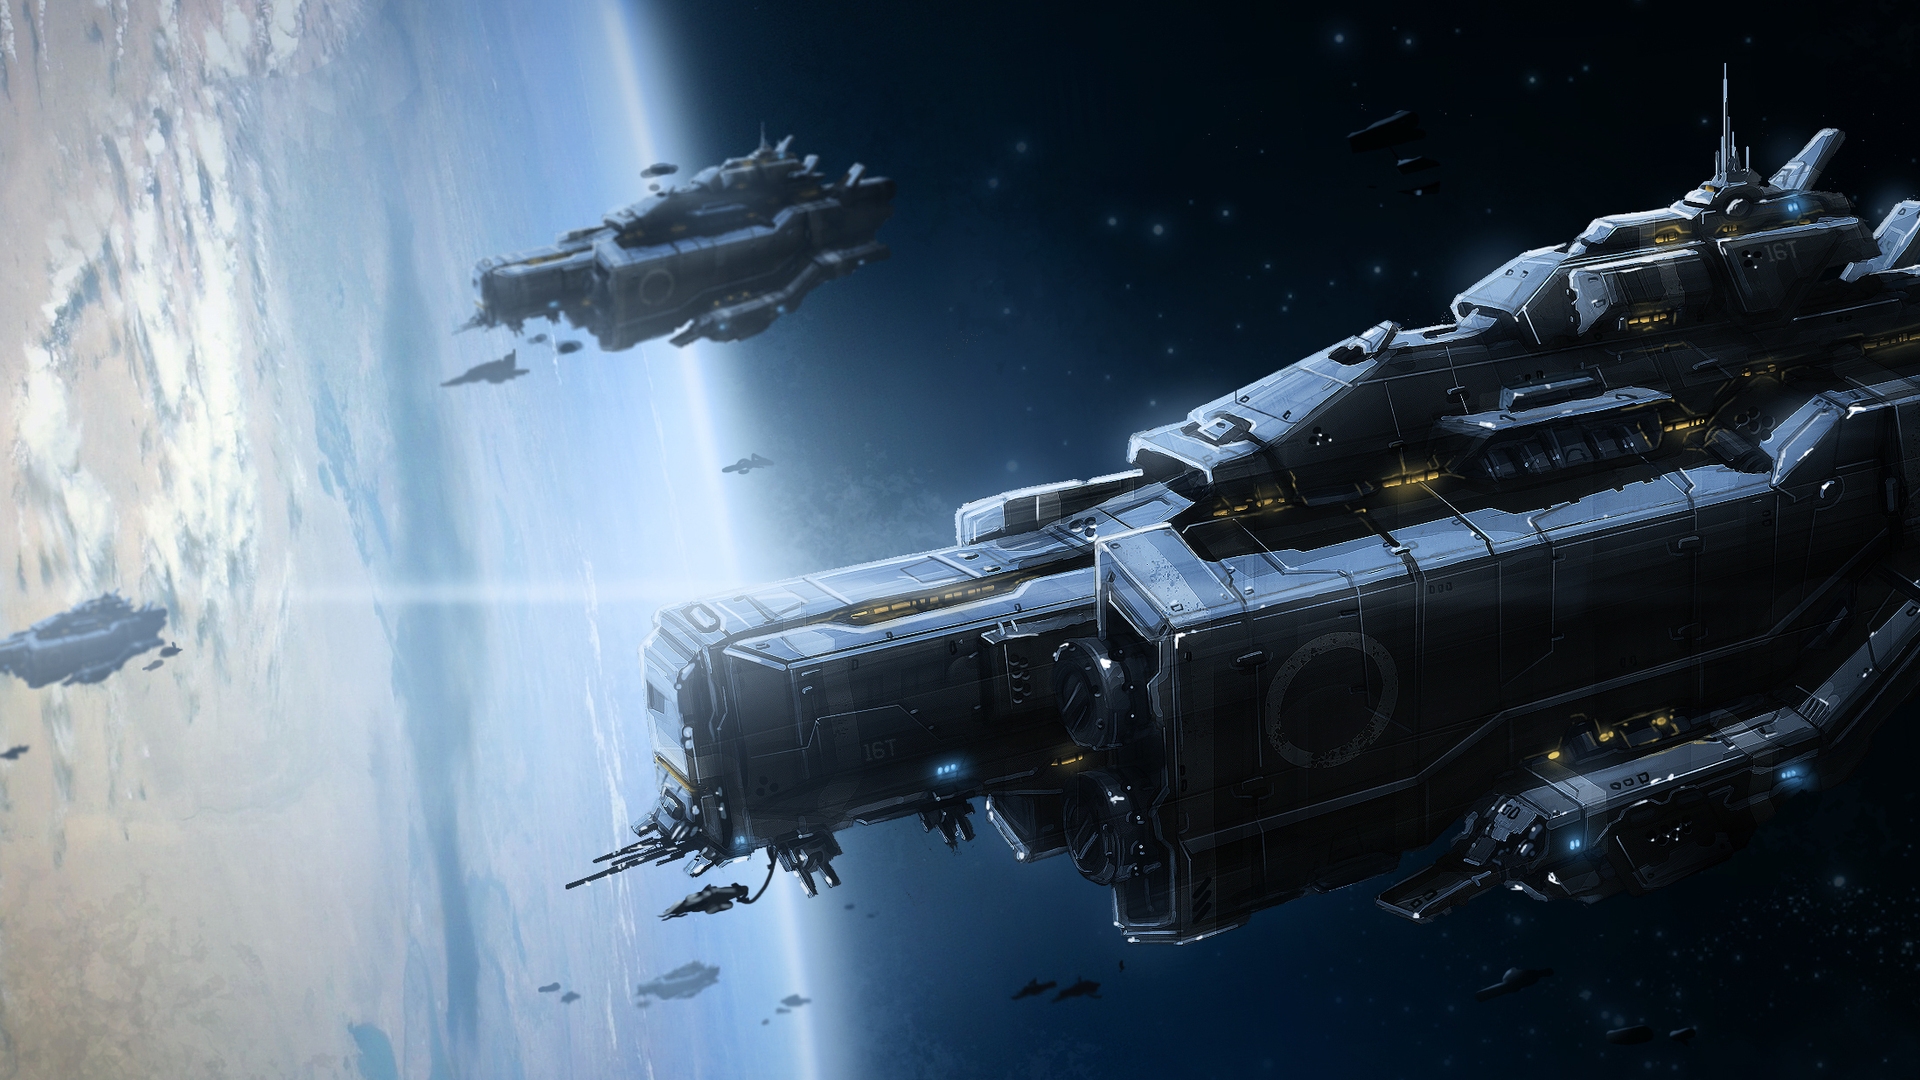 Space Ships for 1920 x 1080 HDTV 1080p resolution